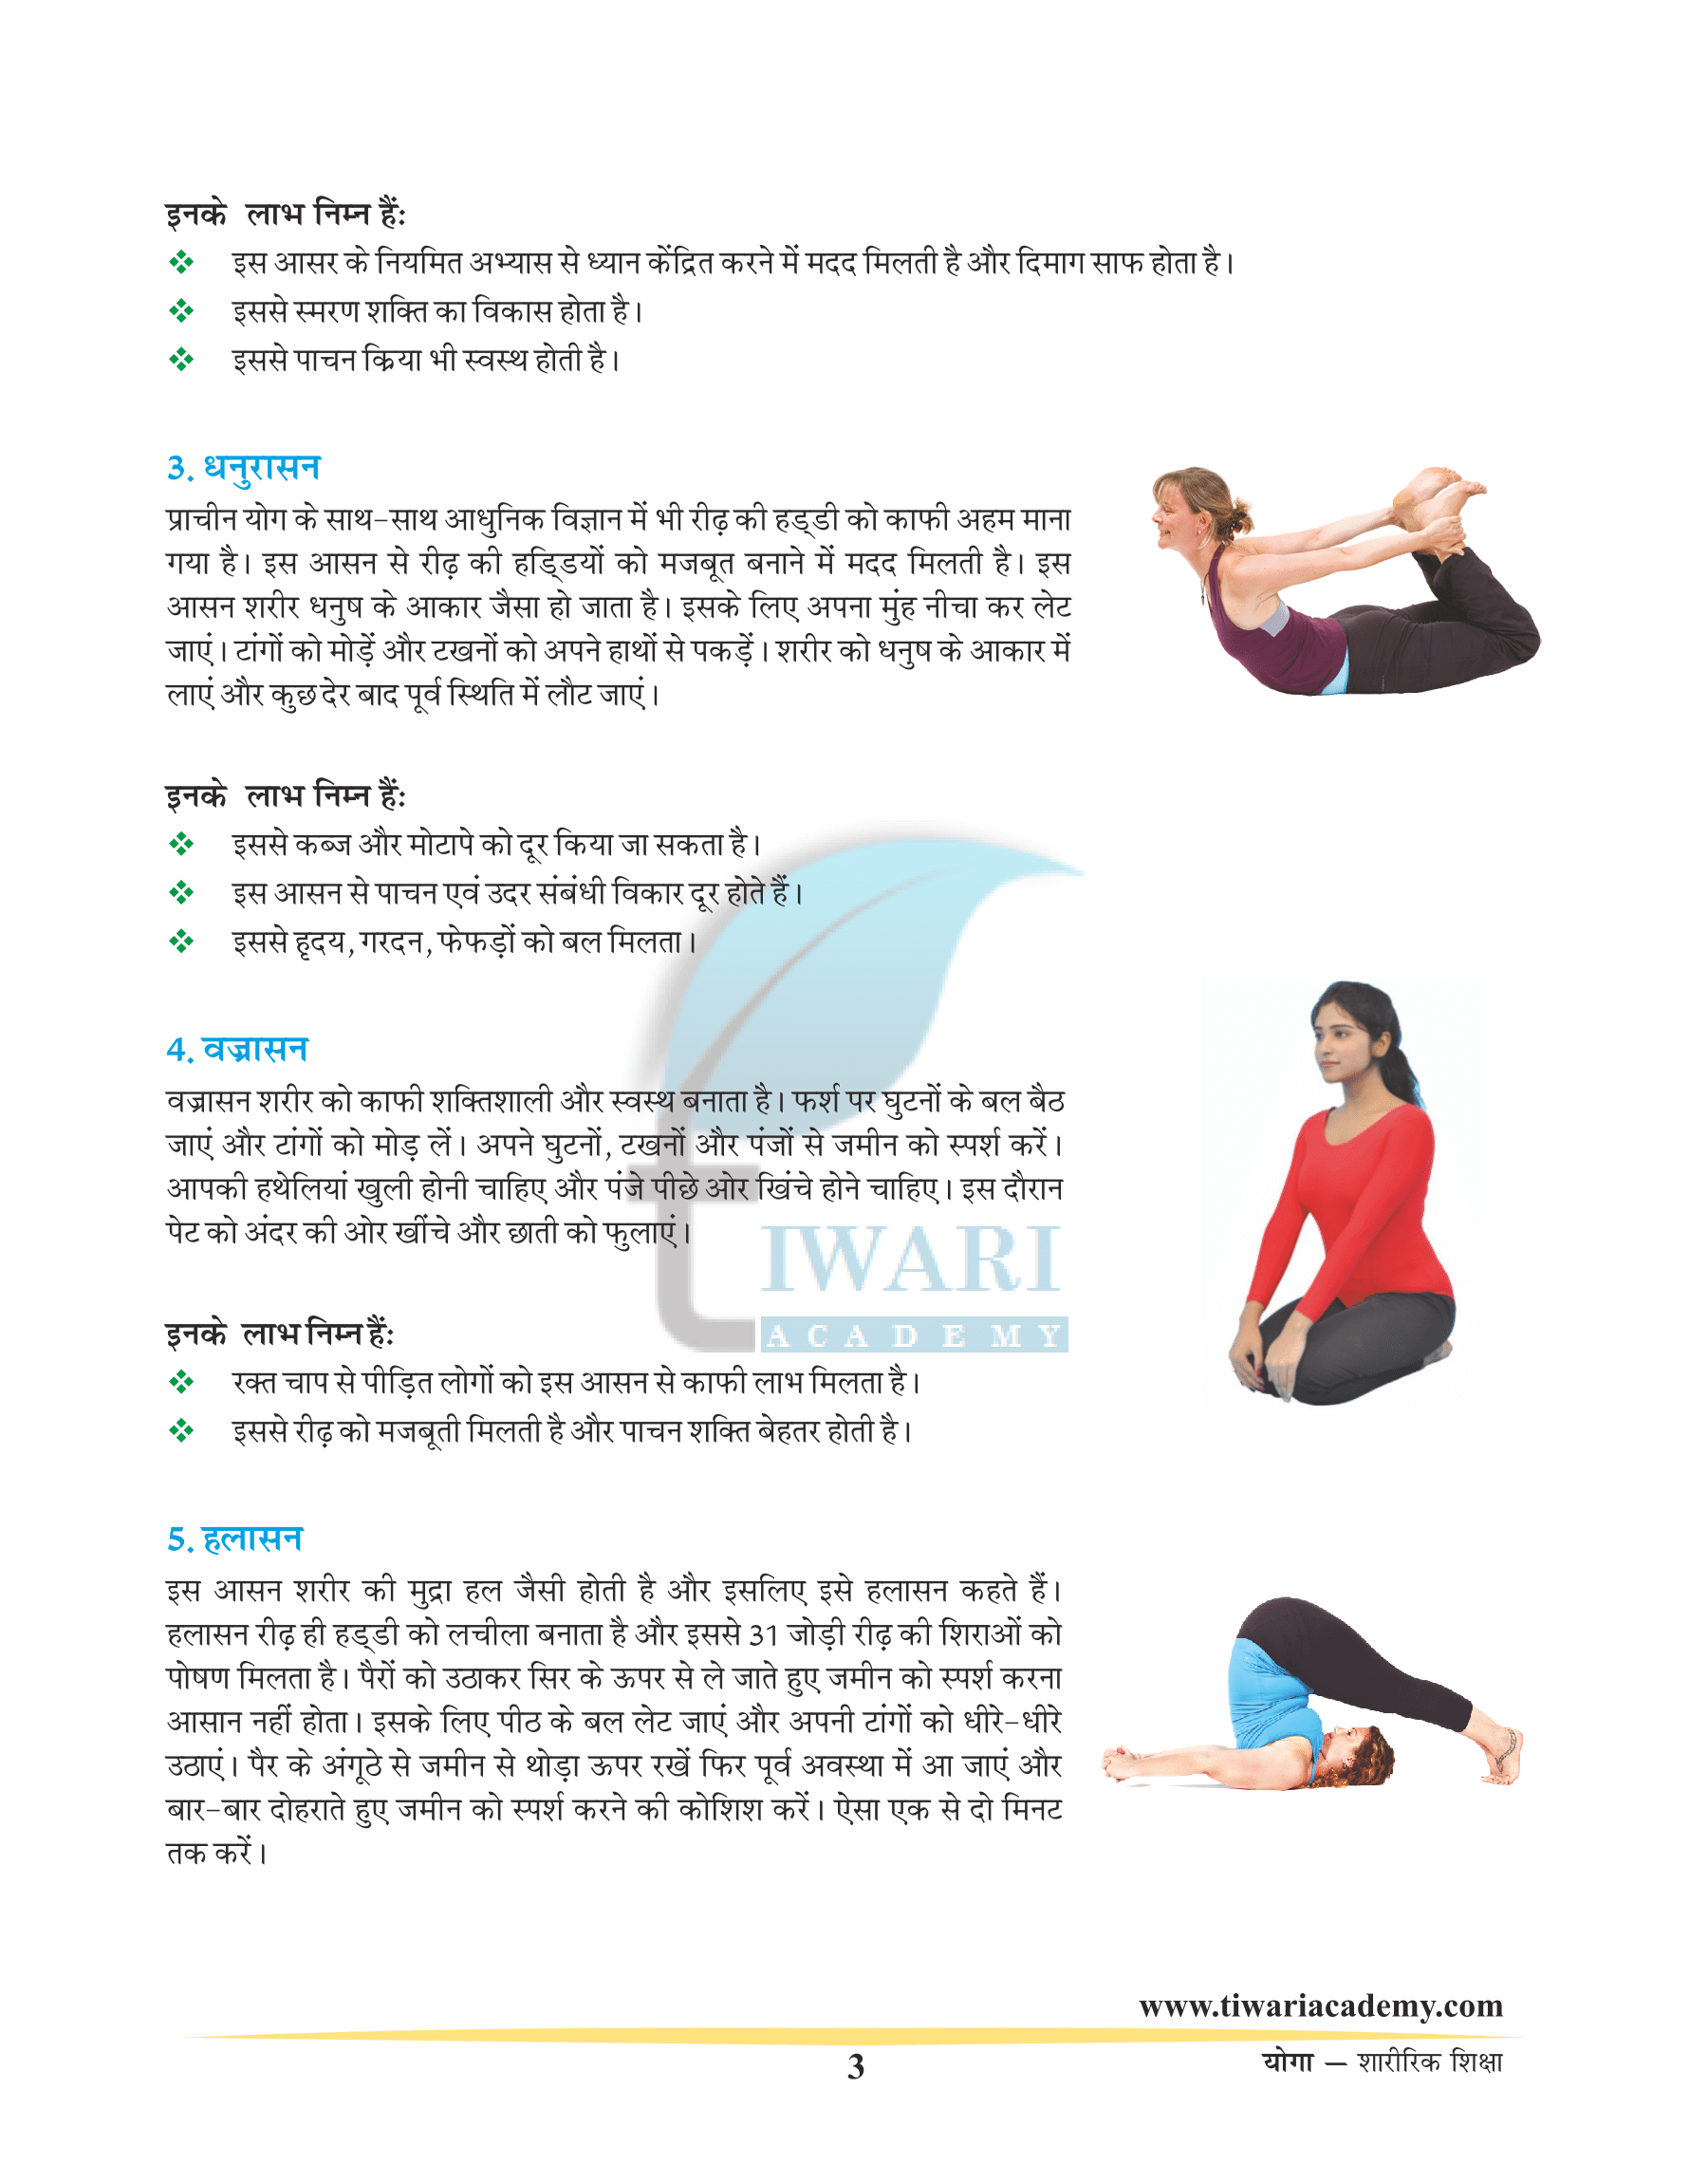 The right way to do Yoga